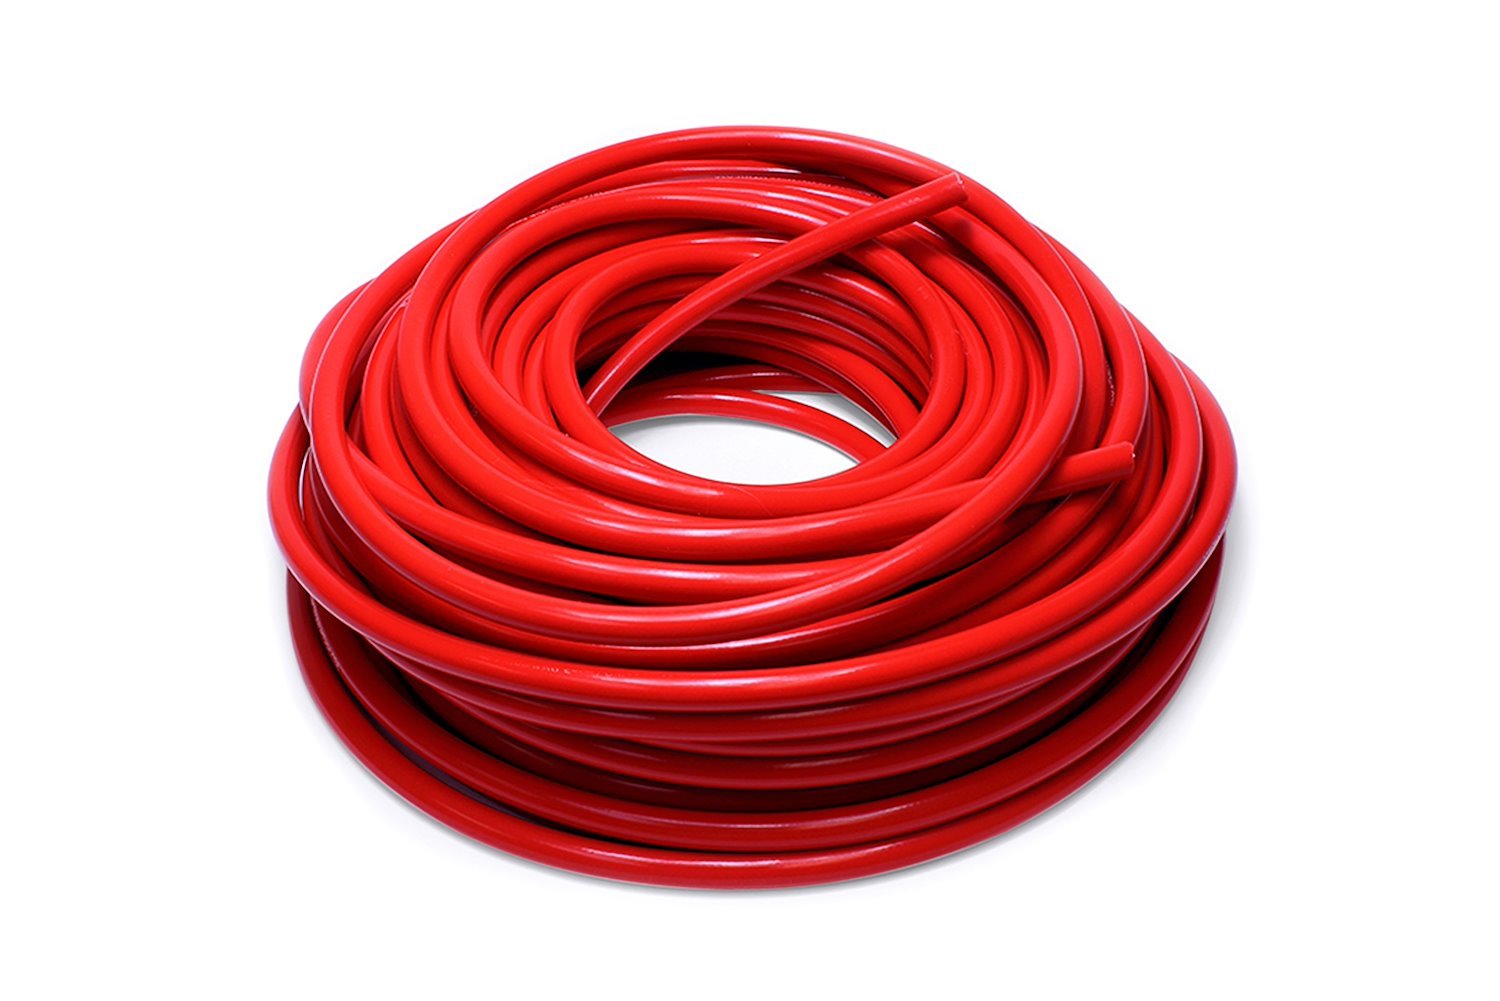 HTHH-075-REDx100 Silicone Heater Hose Tubing, High-Temp 1-Ply Reinforced, 3/4 in. ID, 100 ft. Roll, Red